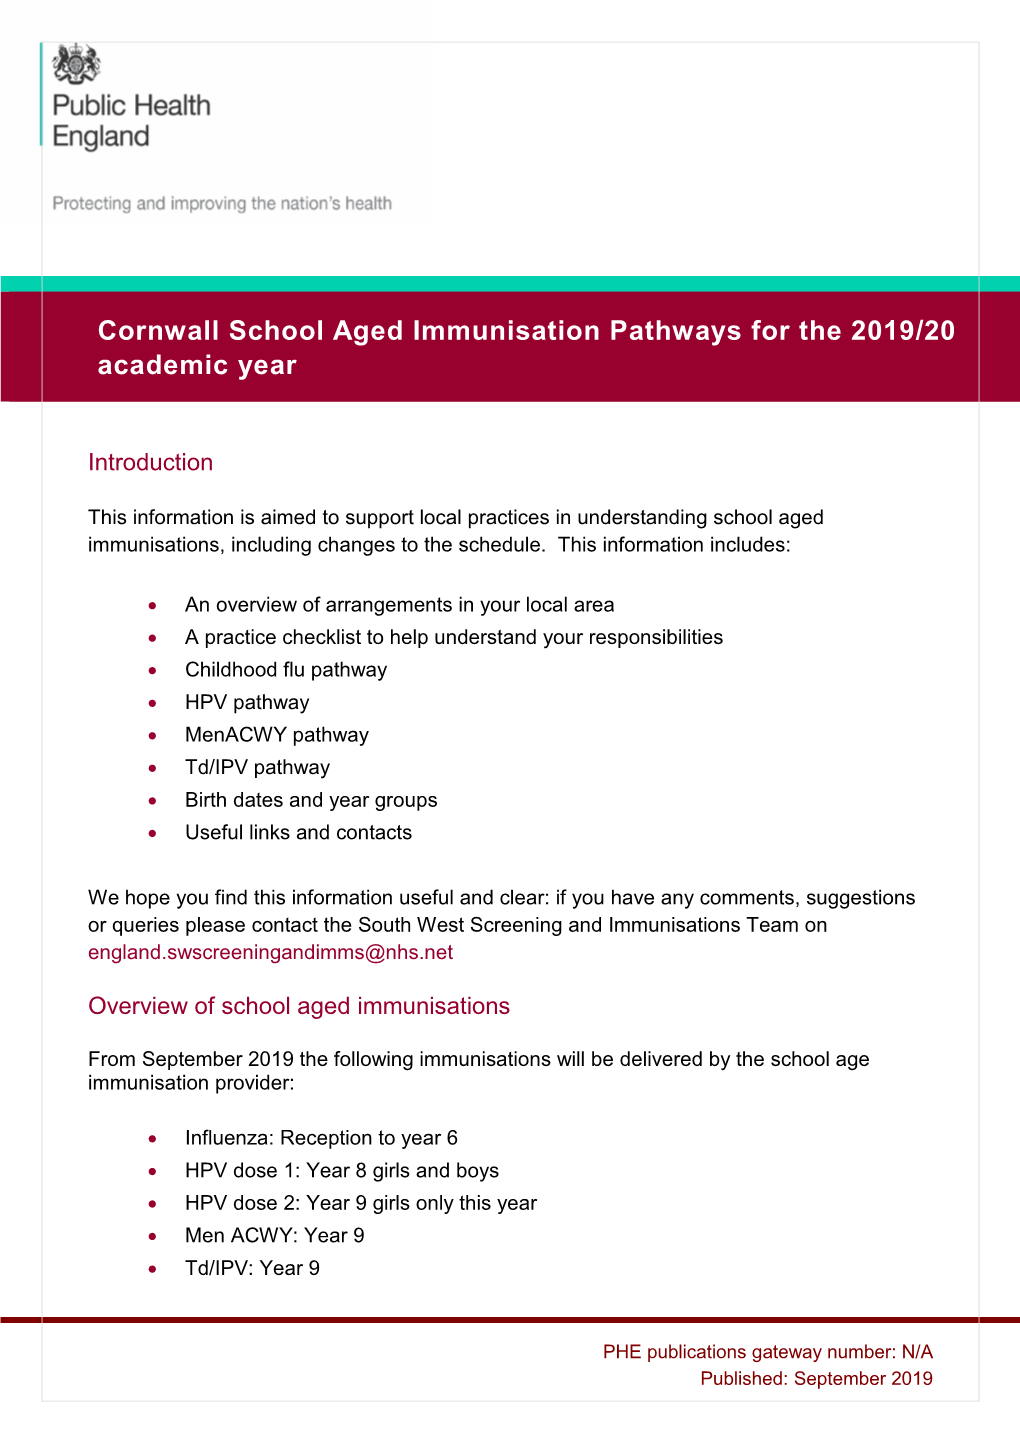 Cornwall School Aged Immunisation Pathways for the 2019/20 Academic Year